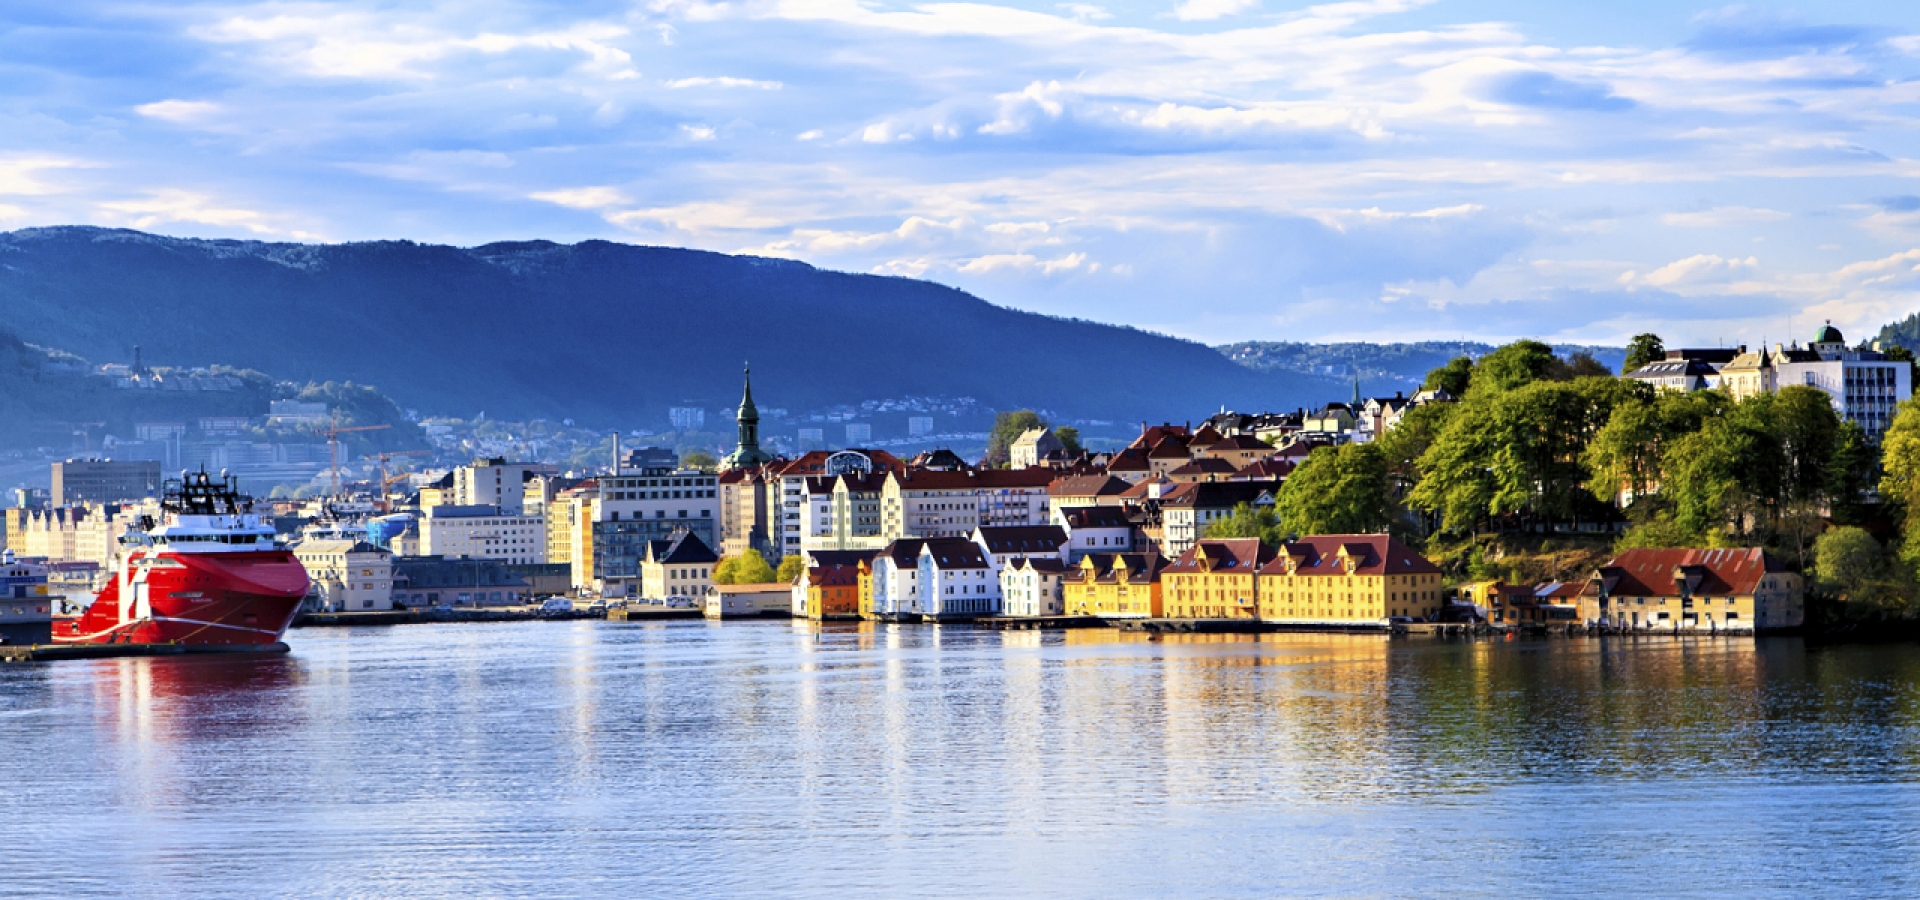 https://www.railbookers.com/sites/railbookers/files/styles/hero/public/images/Bergen-from-the-water-1800x600.jpg?h=3a3df0c5&itok=jrdOMuVB